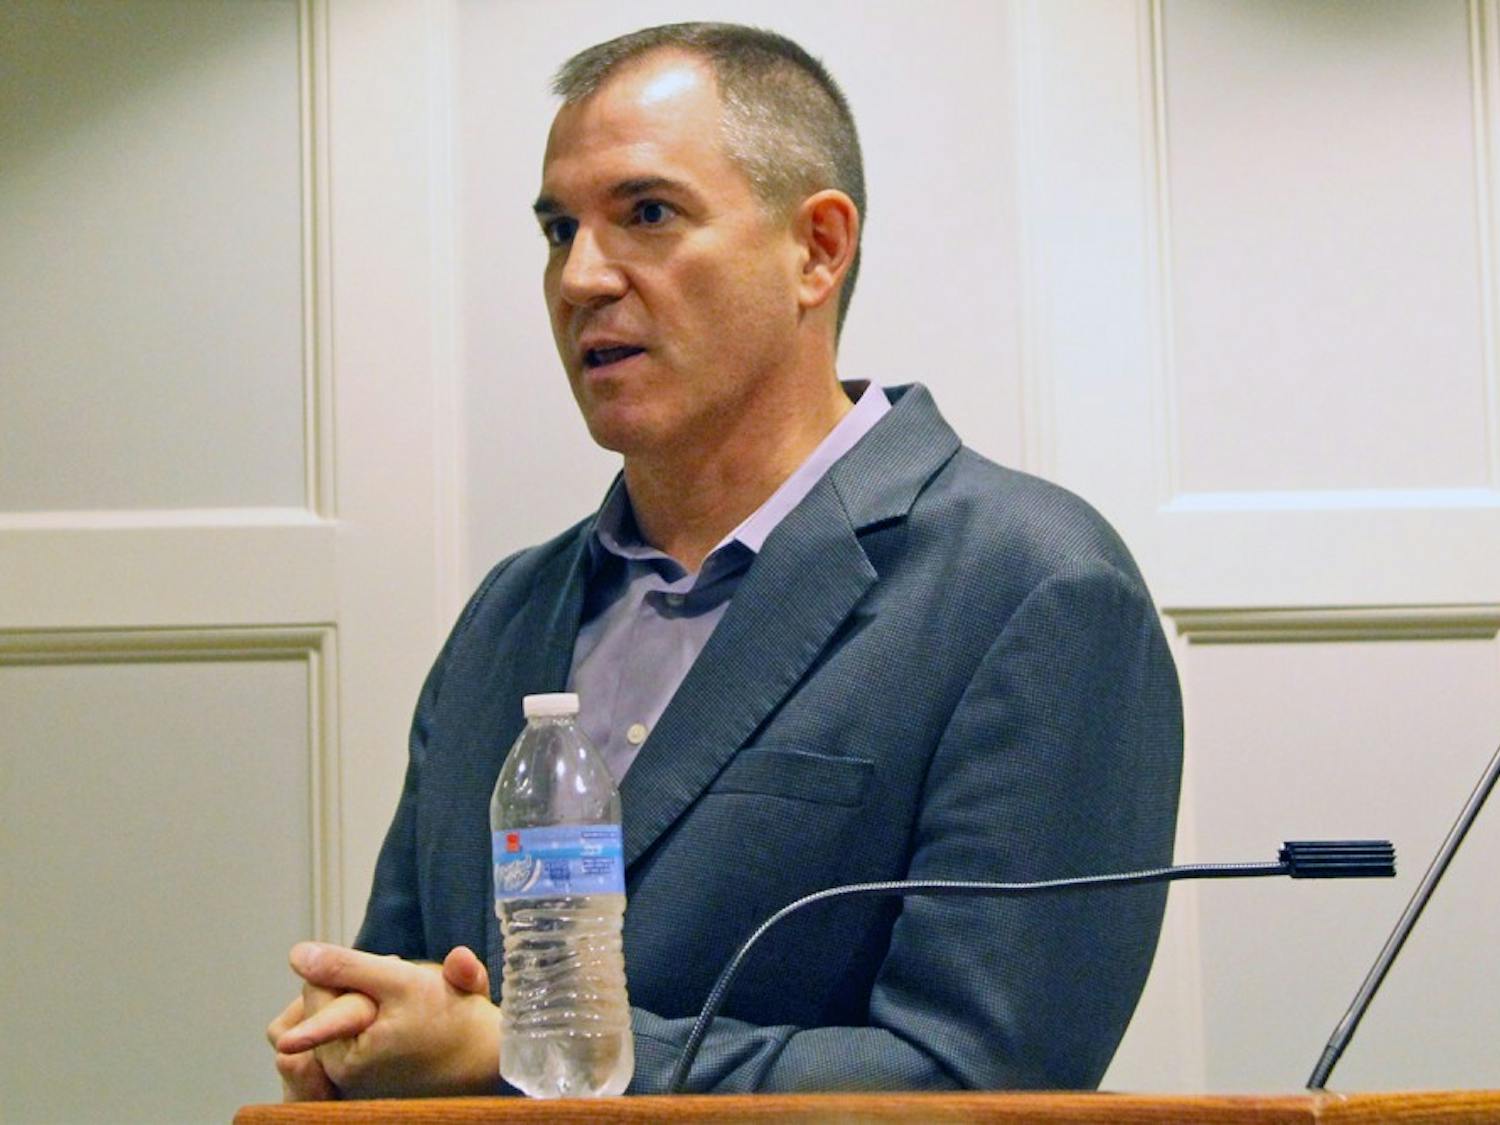 Frank Bruni, UNC Alumnus and current op-ed columnist for the New York Times, answers questions after a speech.